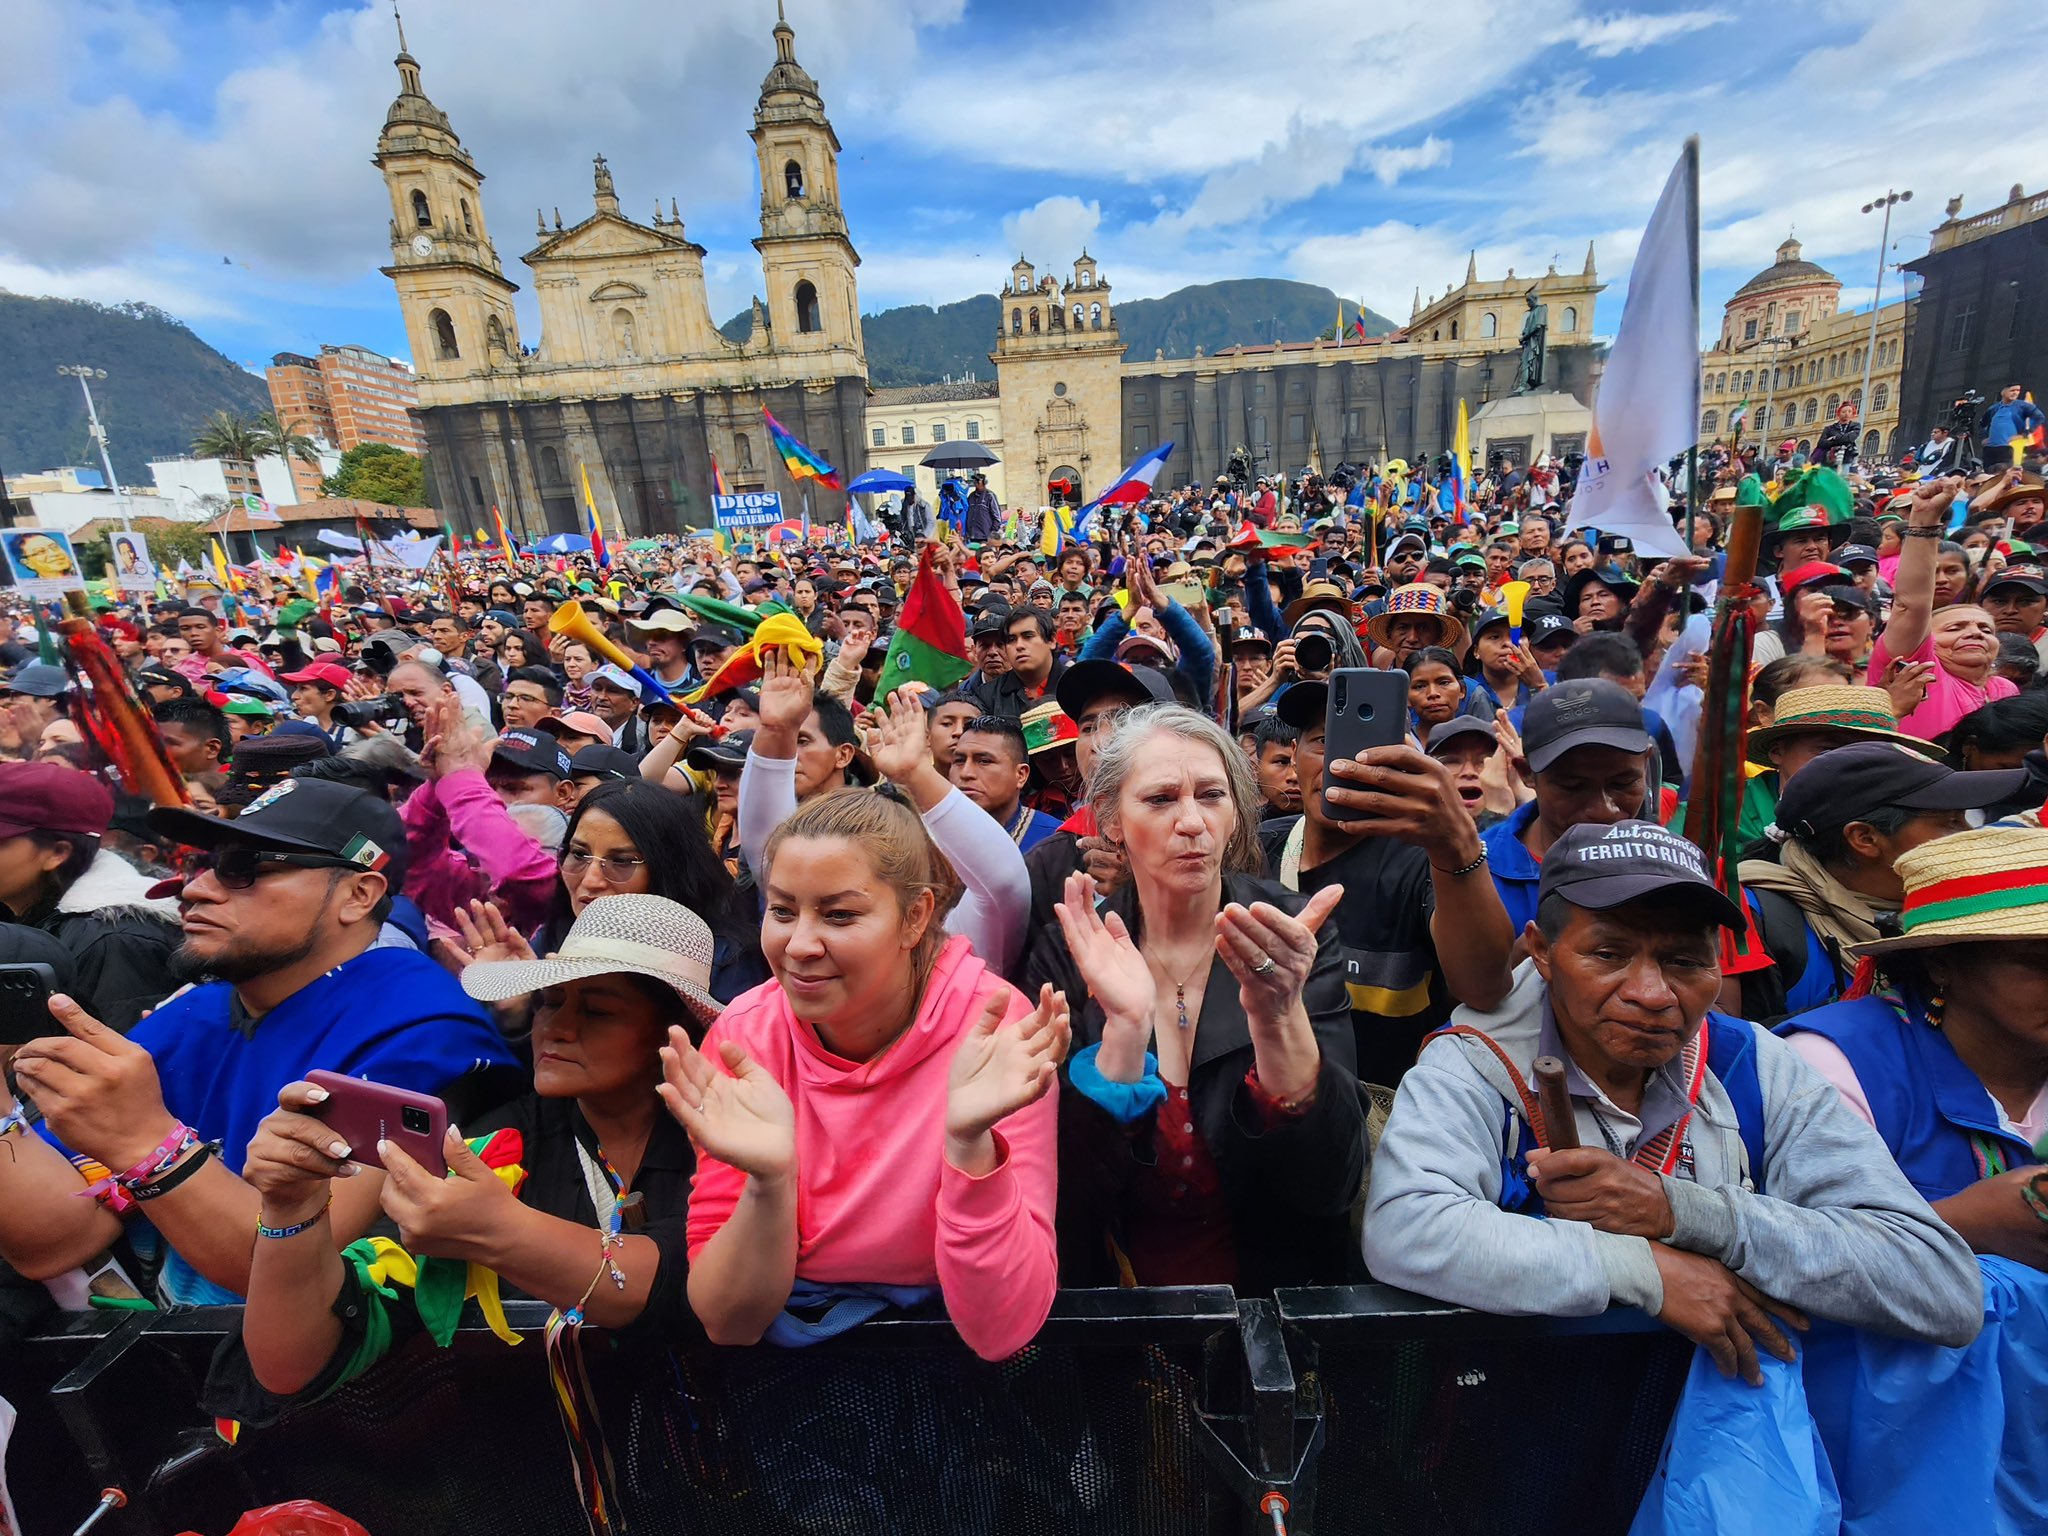 Petro on demos in Colombia: “Mobilized society prevents the fall of the government”